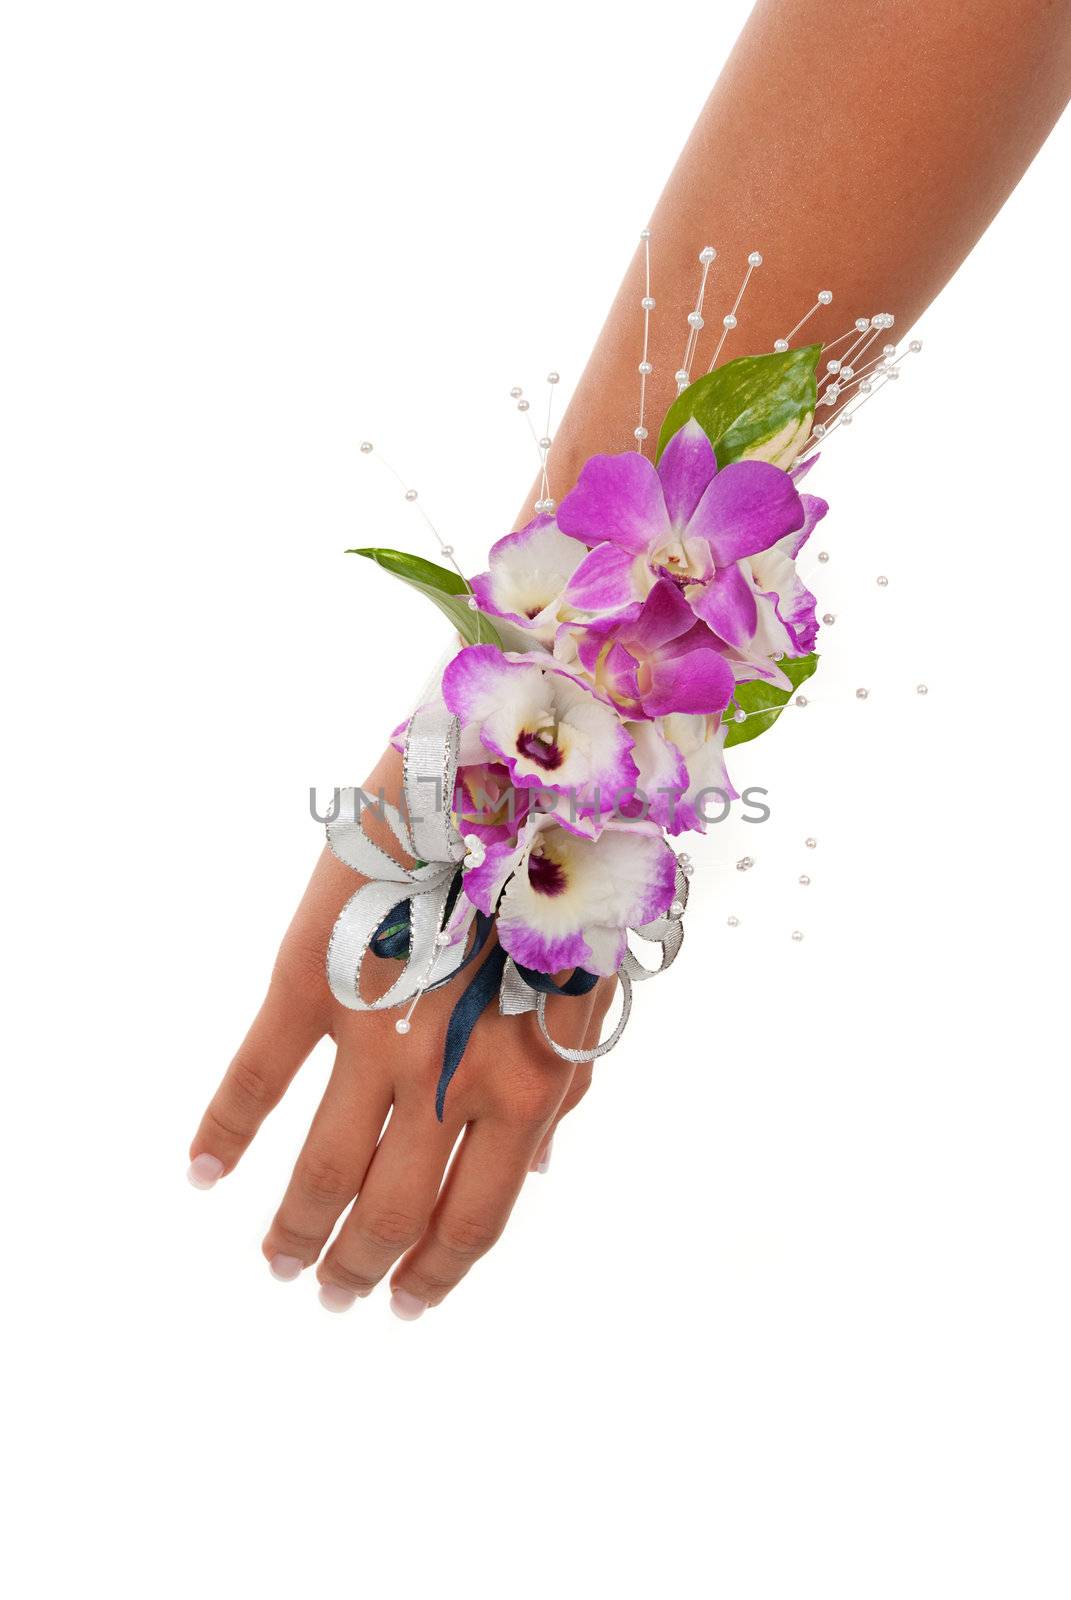 Prom or wedding orchid corsage